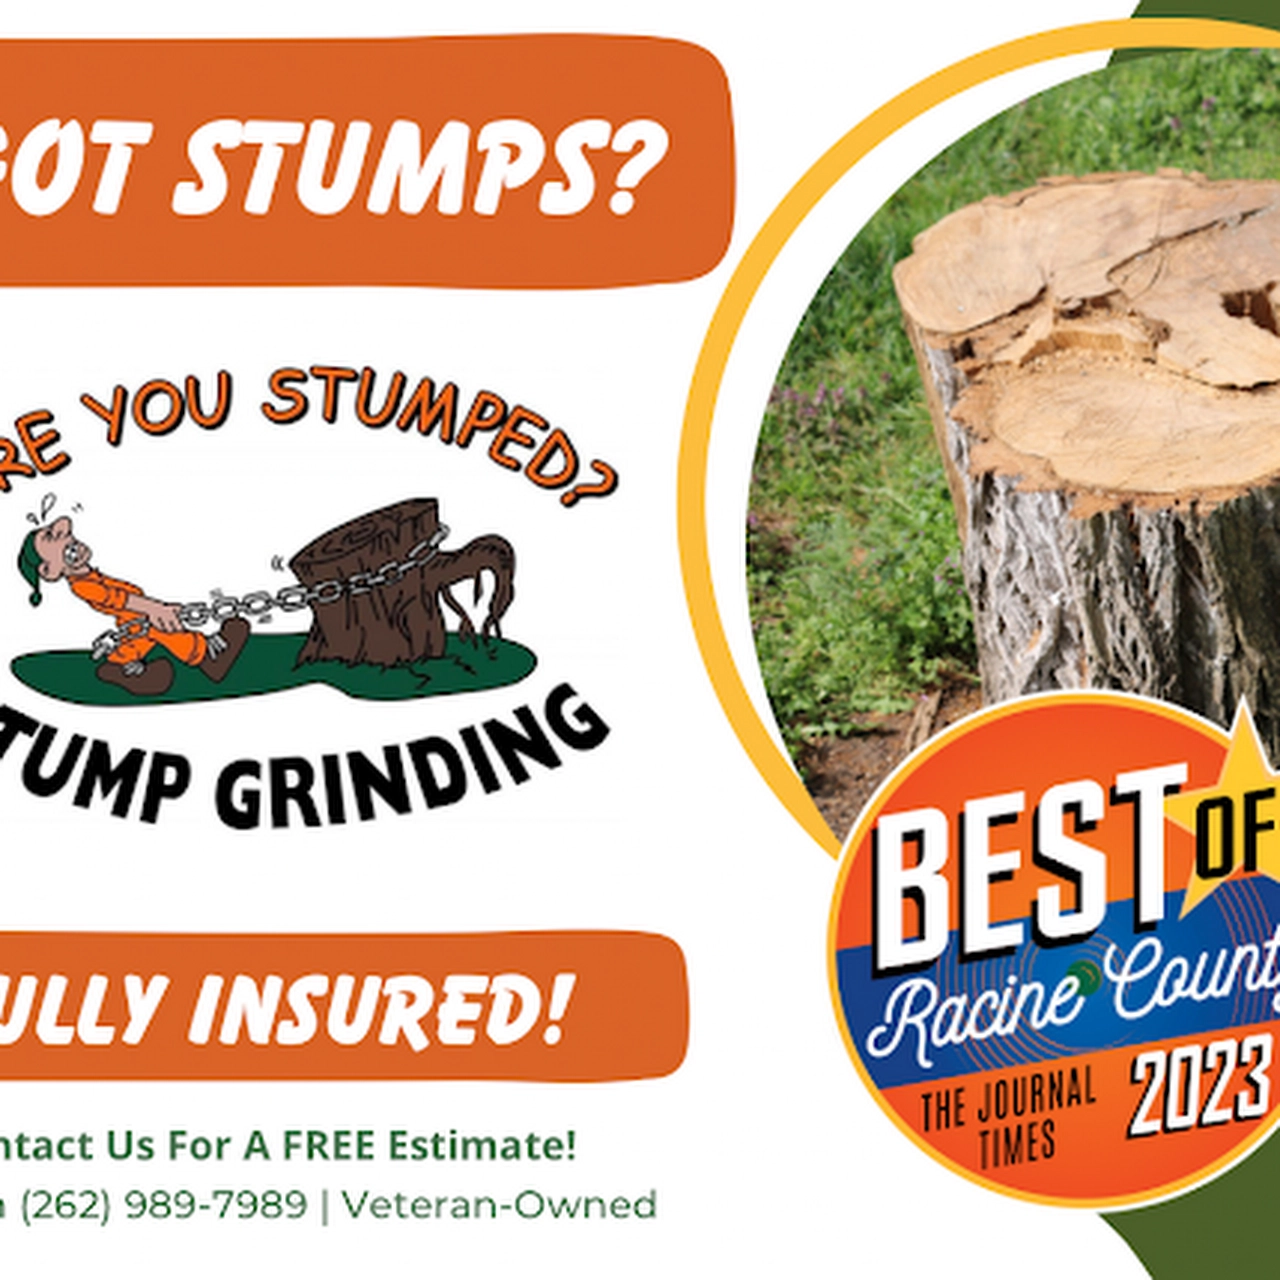 Are you stumped? Stump grinding Logo